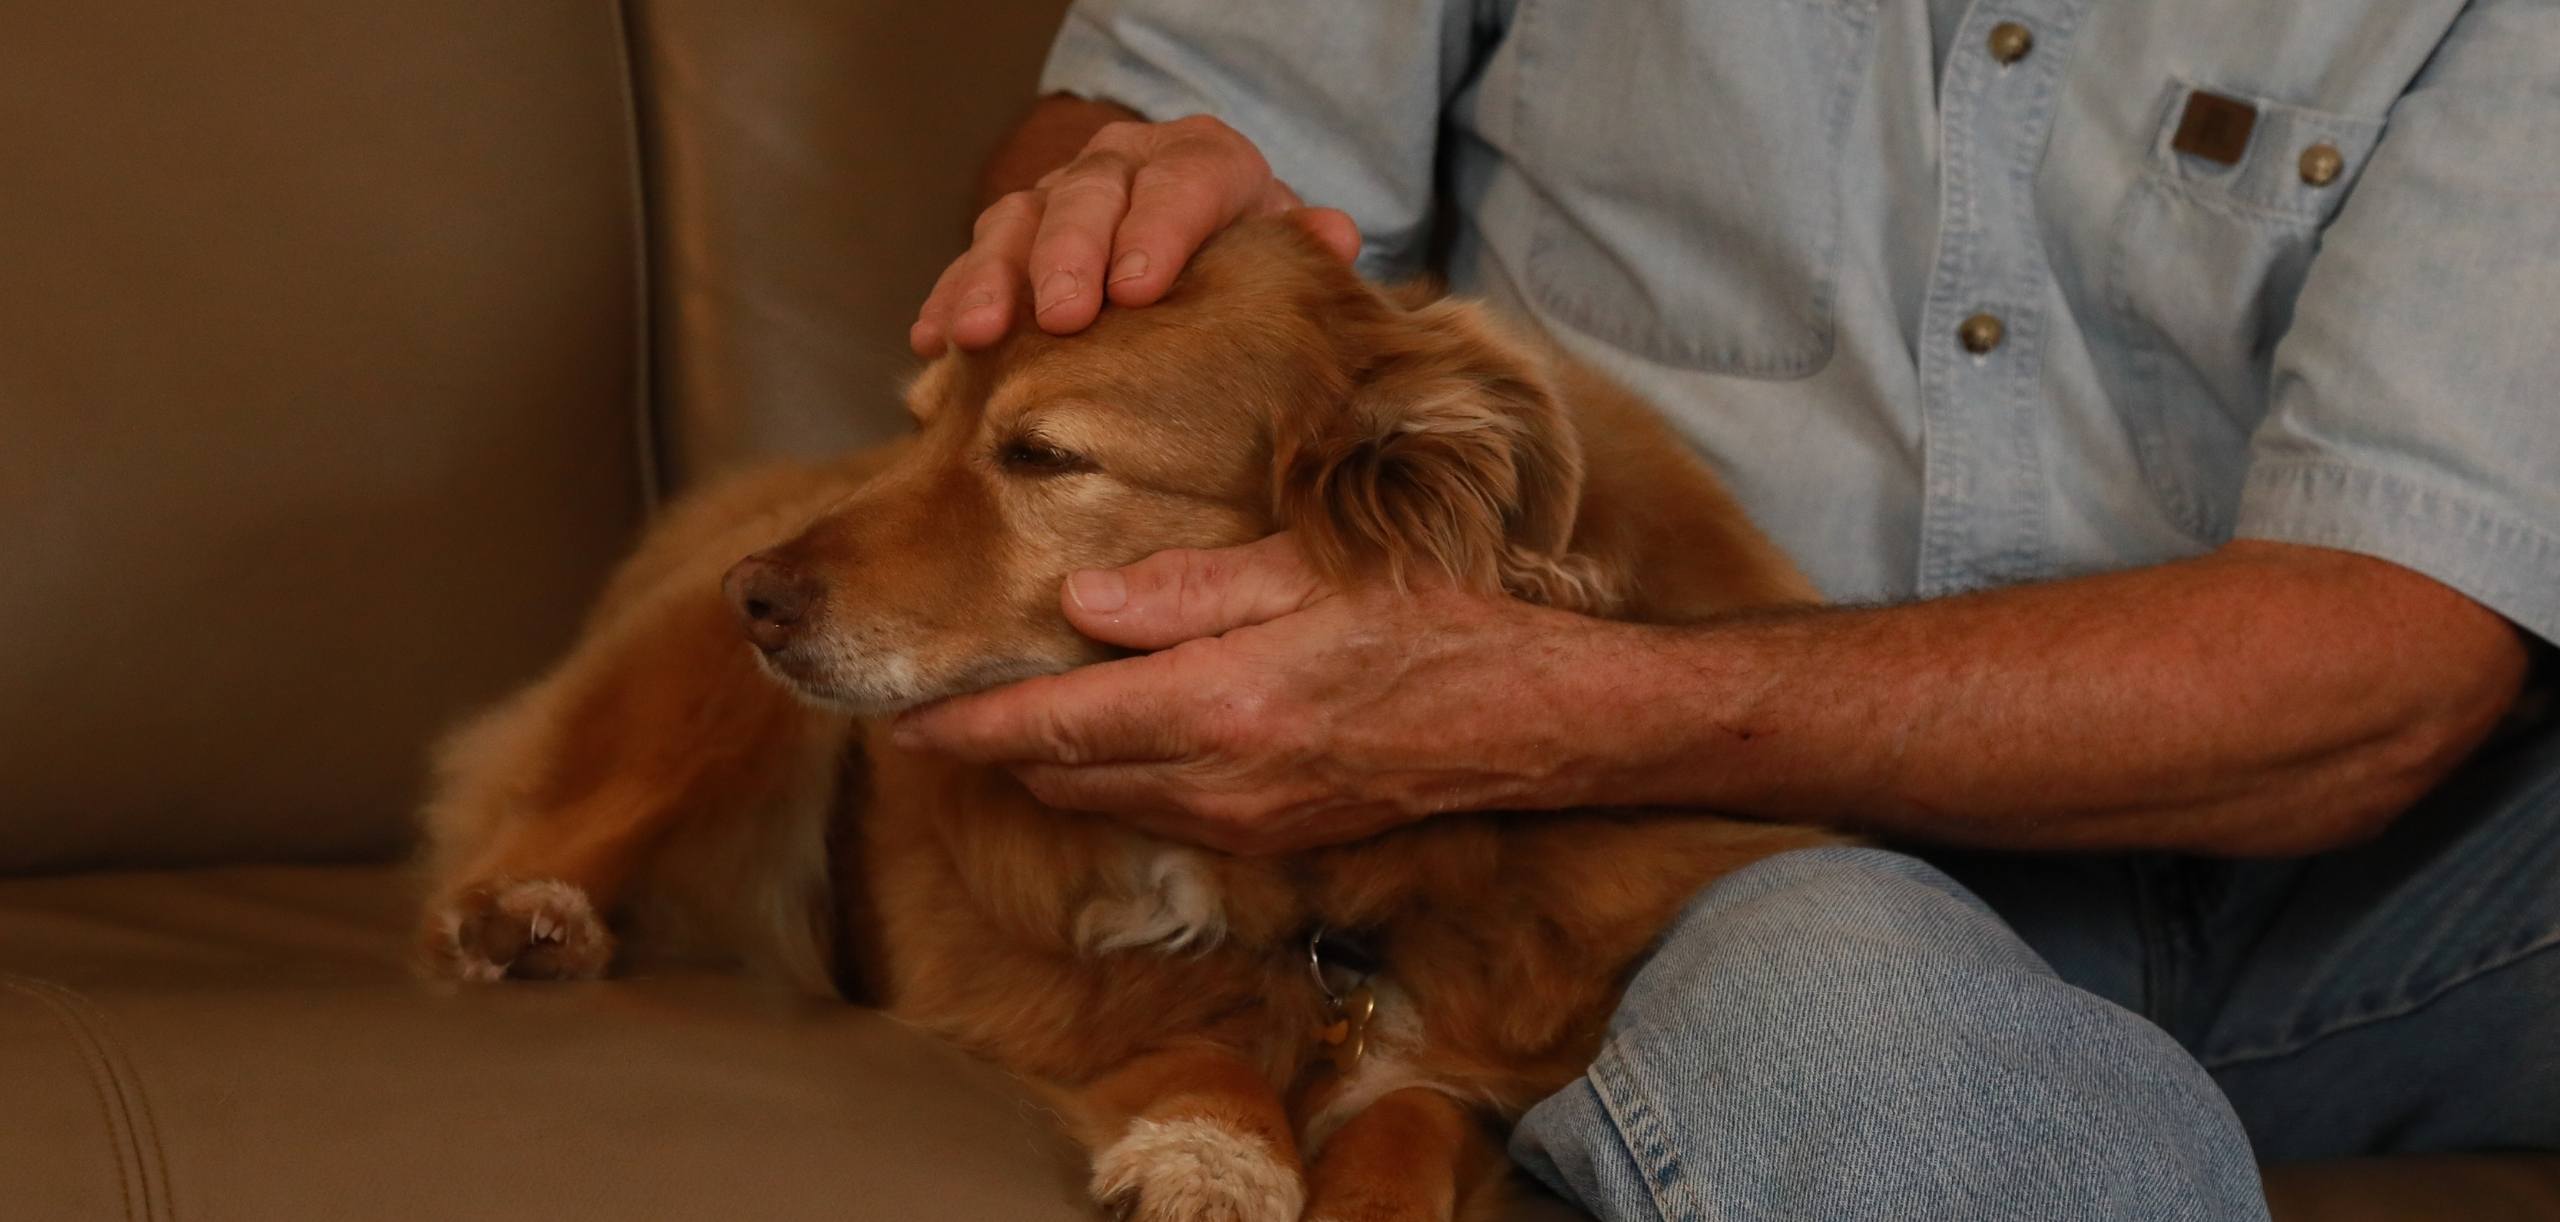 Photo of Jim using light touch on a relaxed dog lying next to him on a couch.